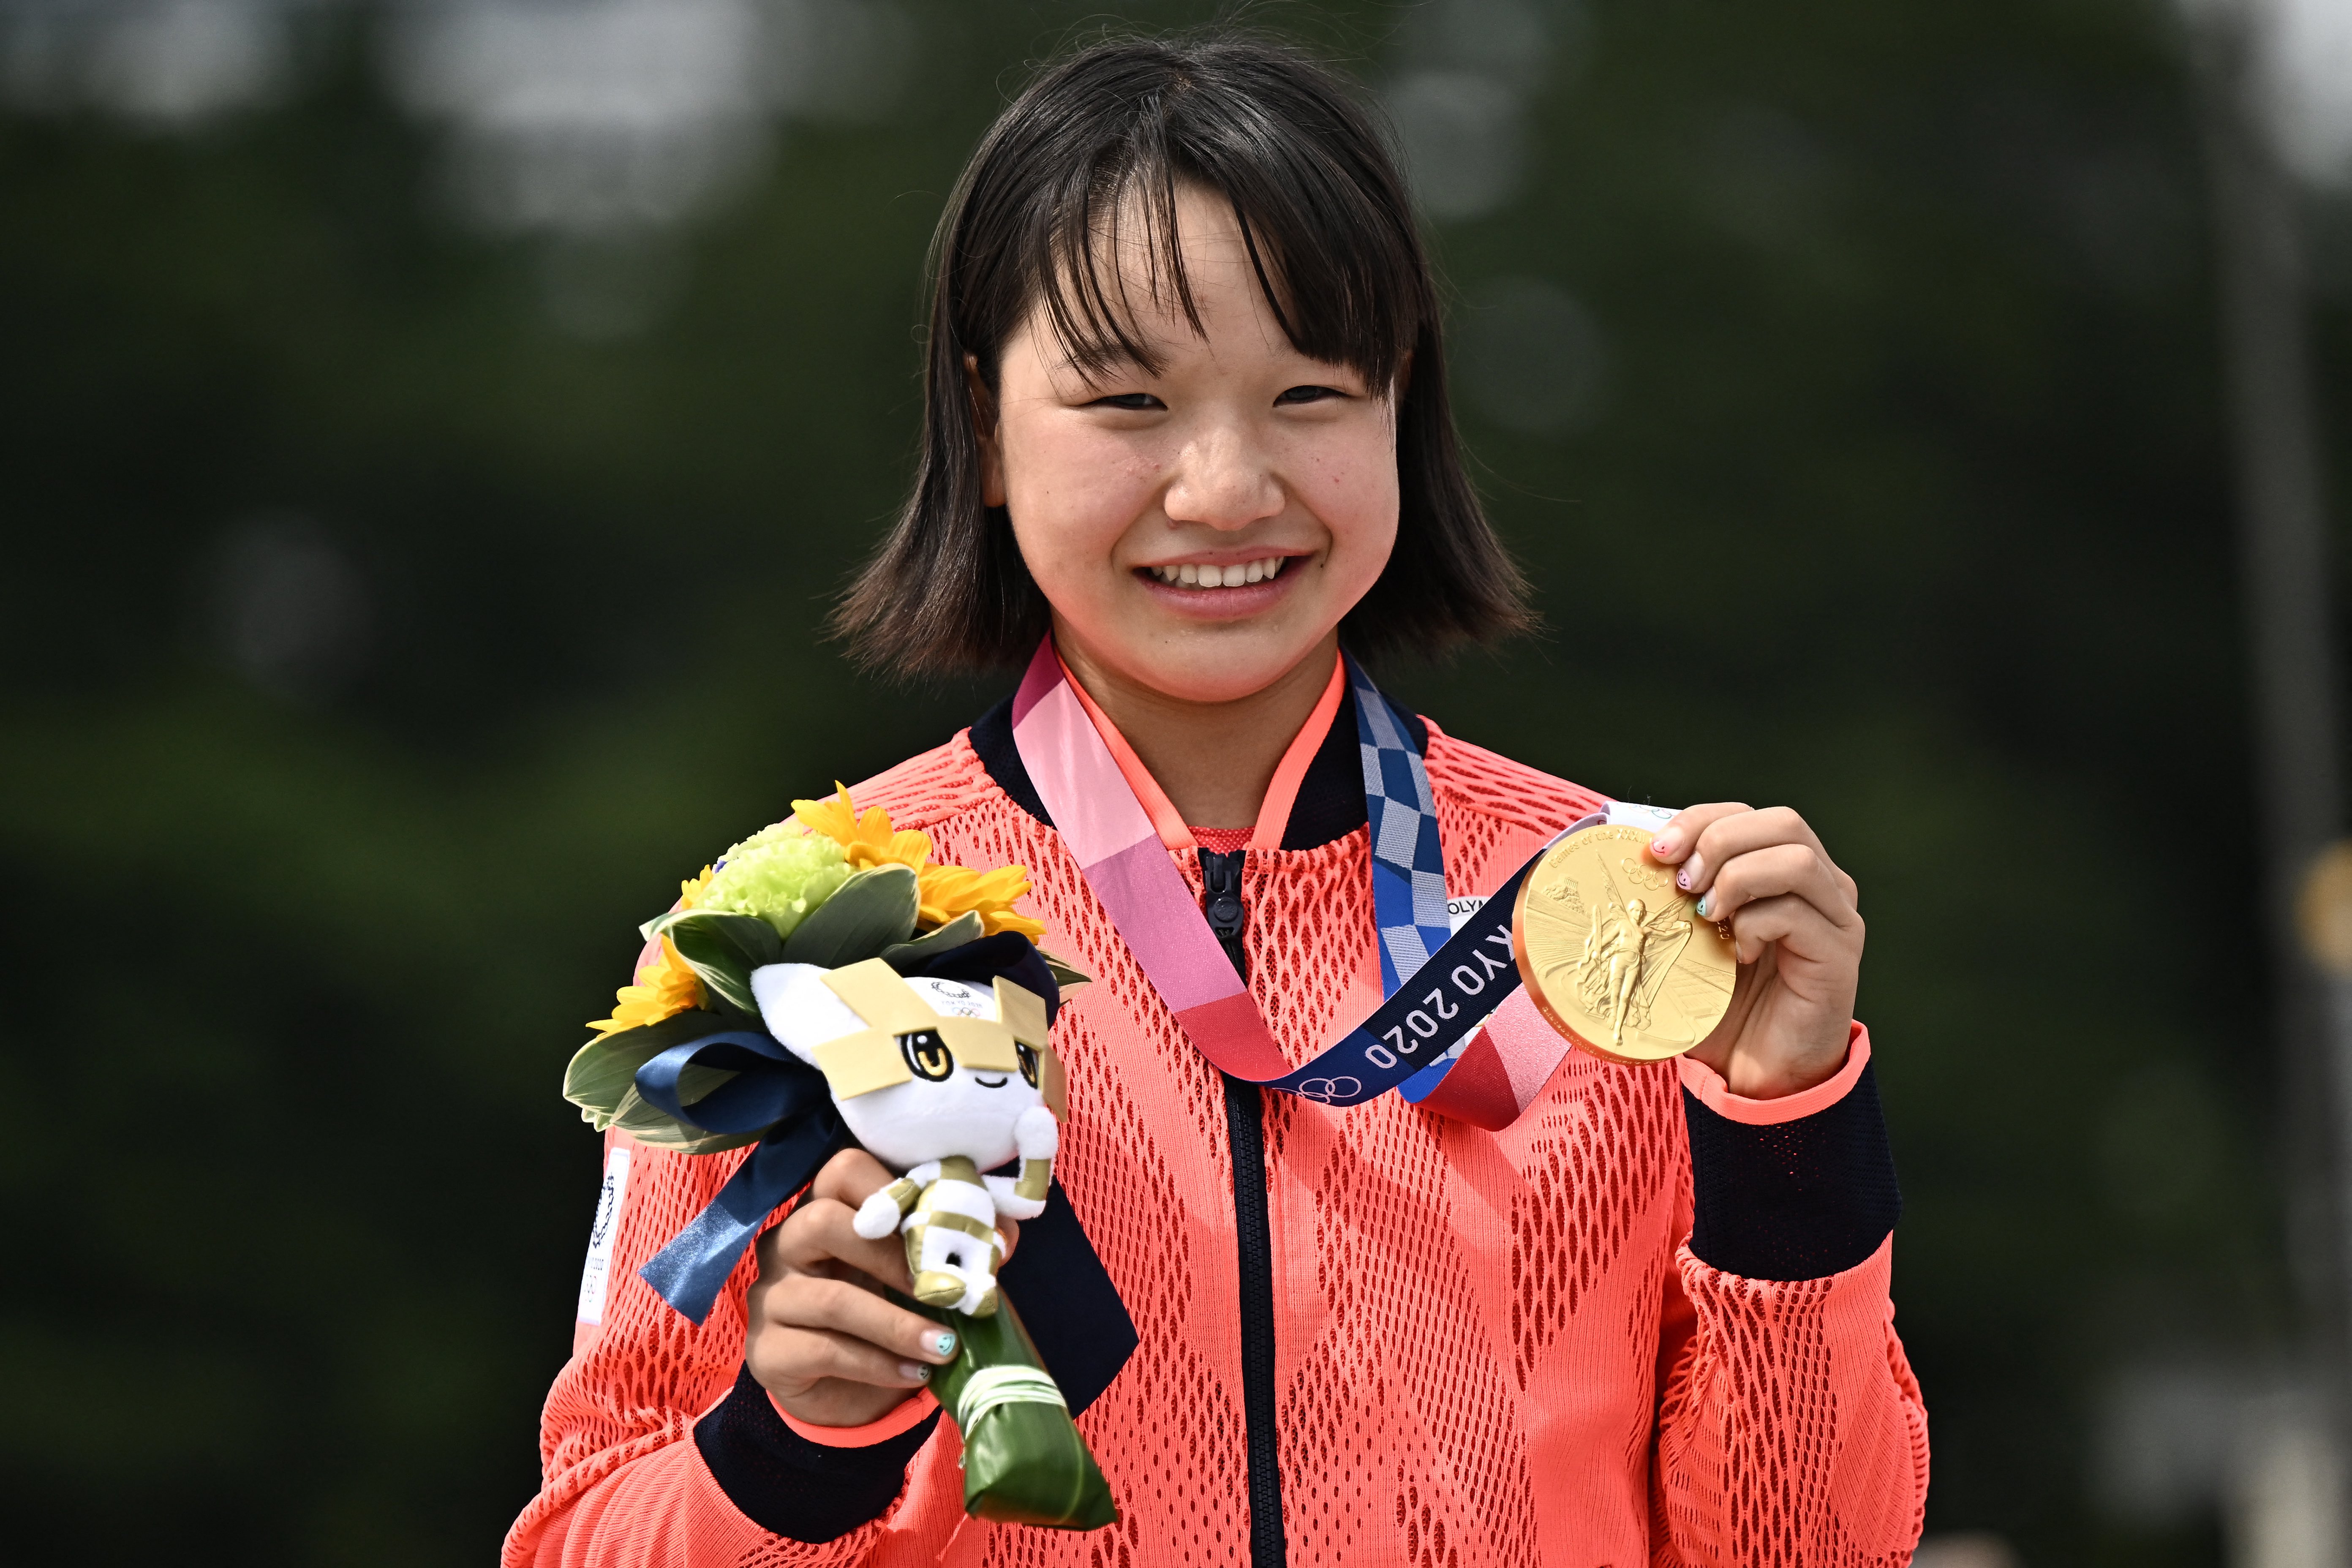 Meet the Youngest Athletes at the Tokyo Olympics, Most of Whom Are